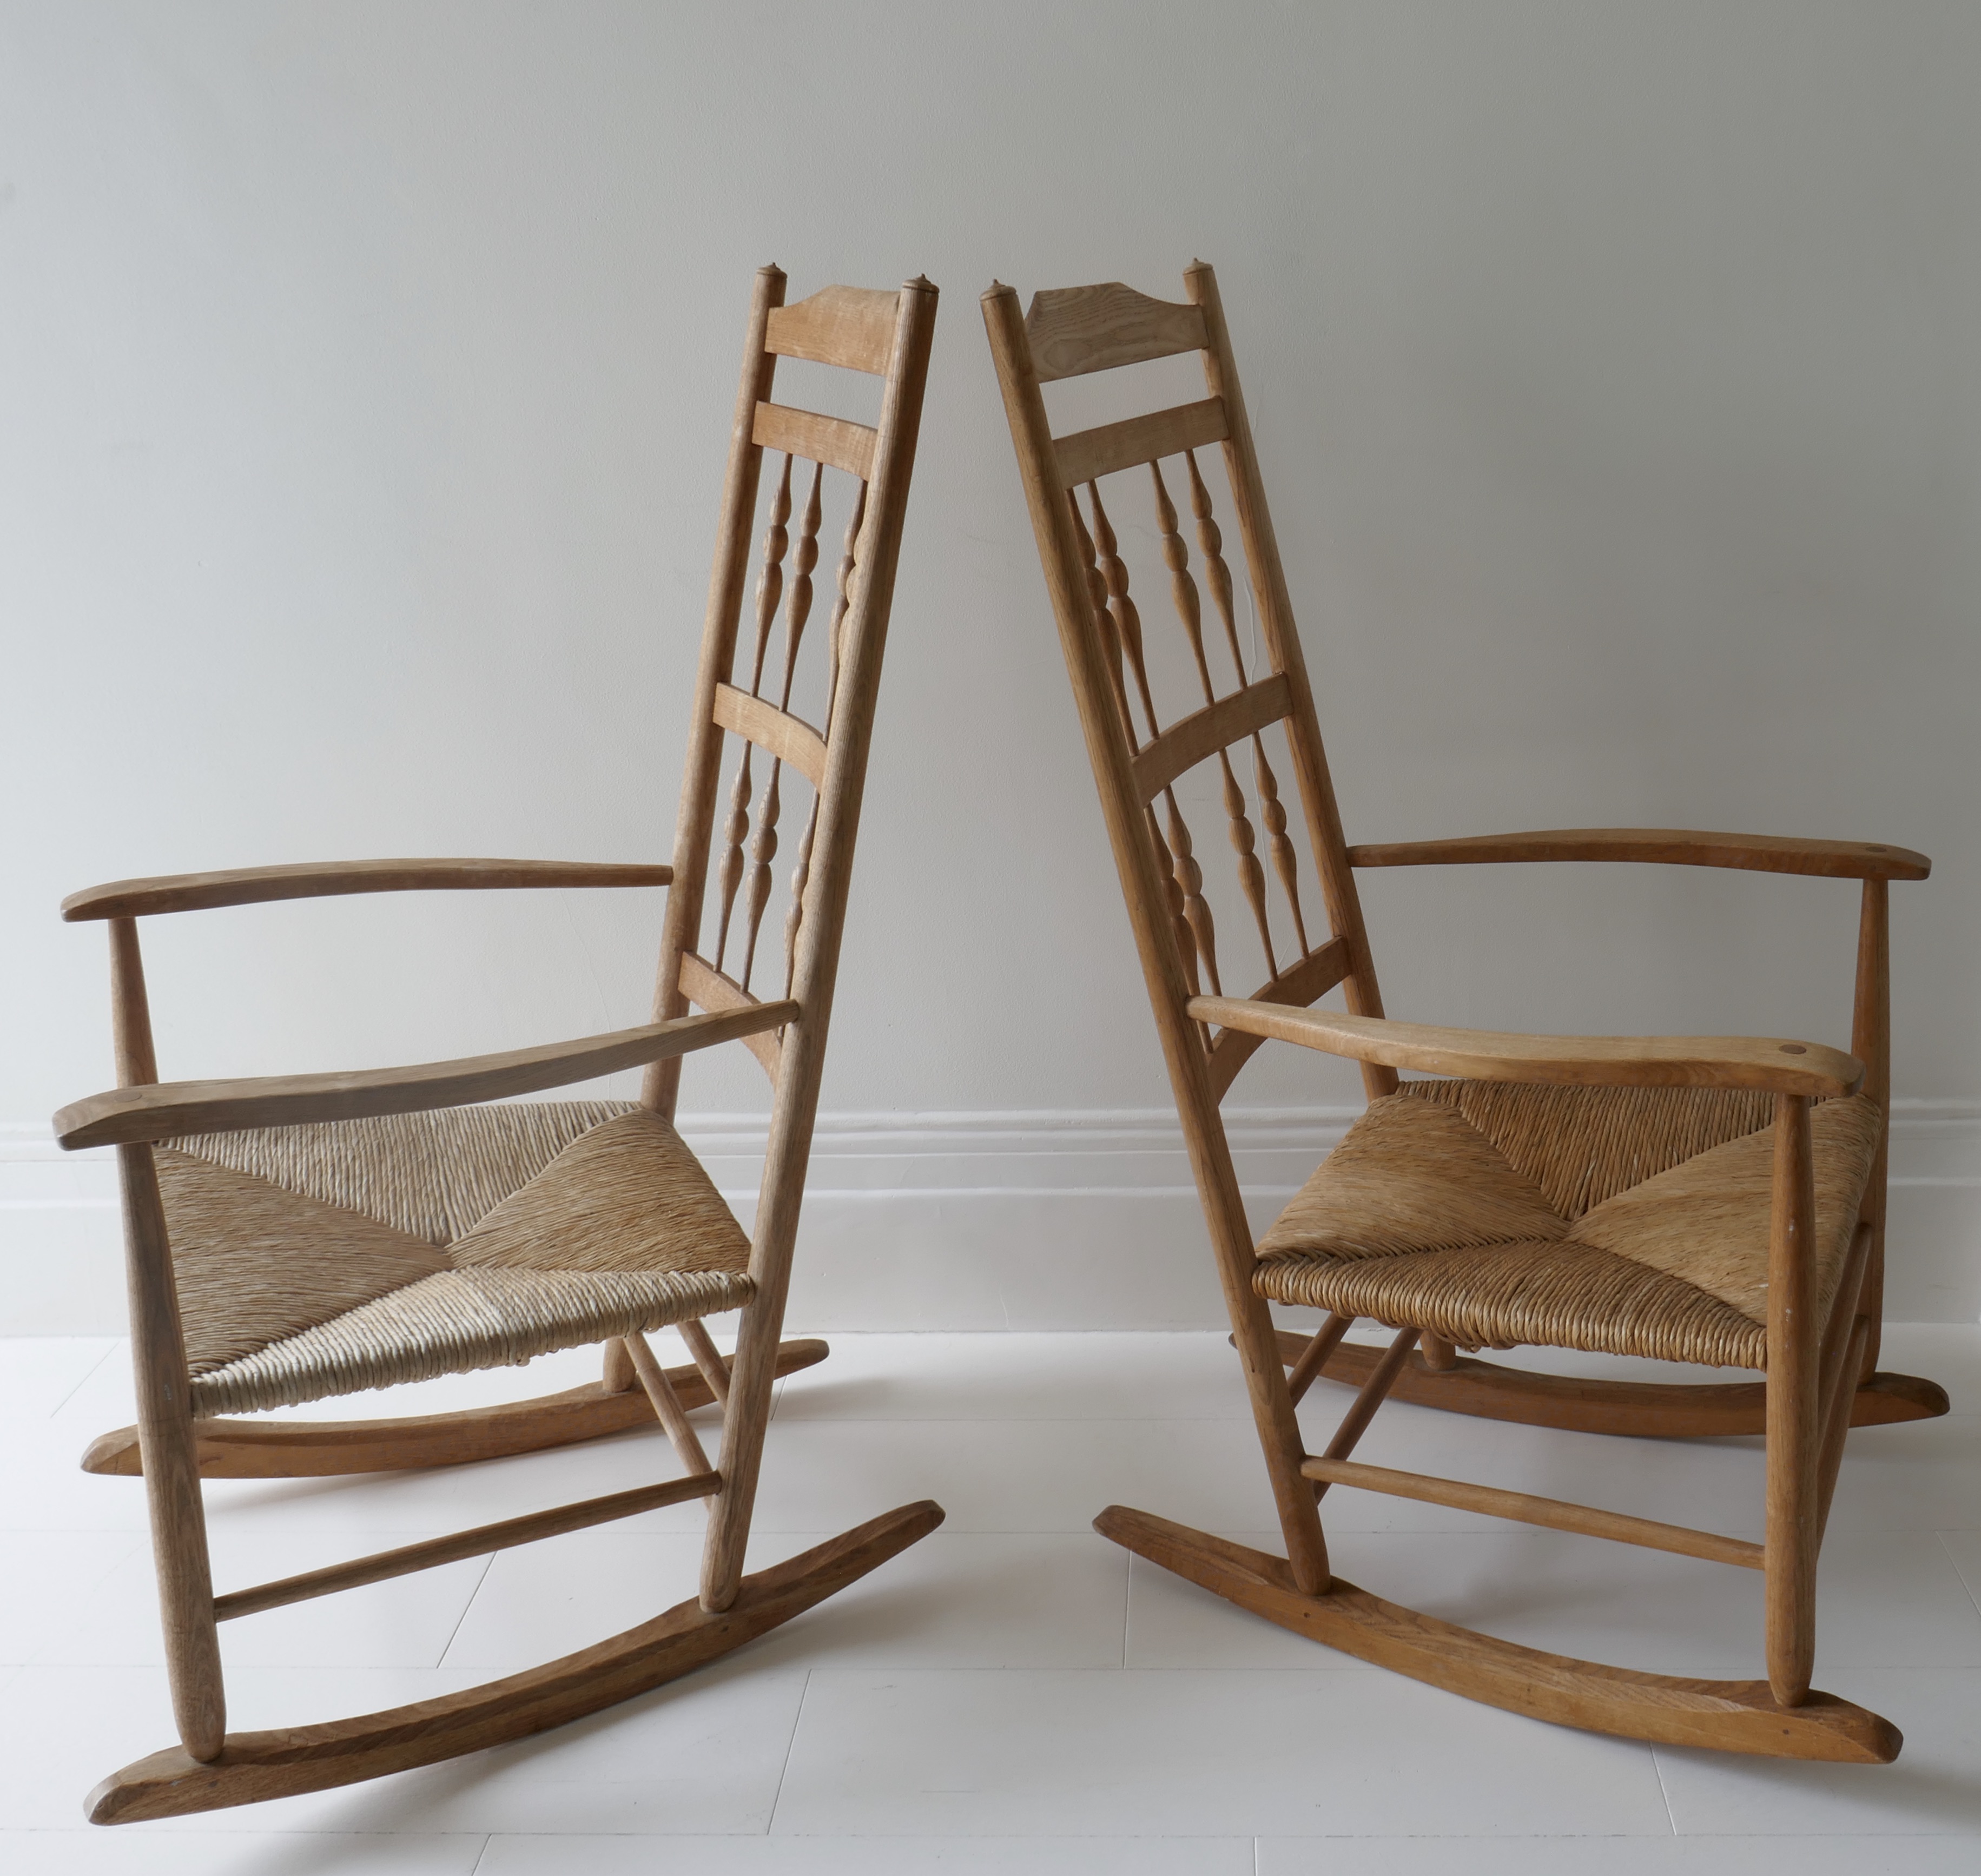 Sold - Pair of Mid-century English wood rocking chairs and straw seats.